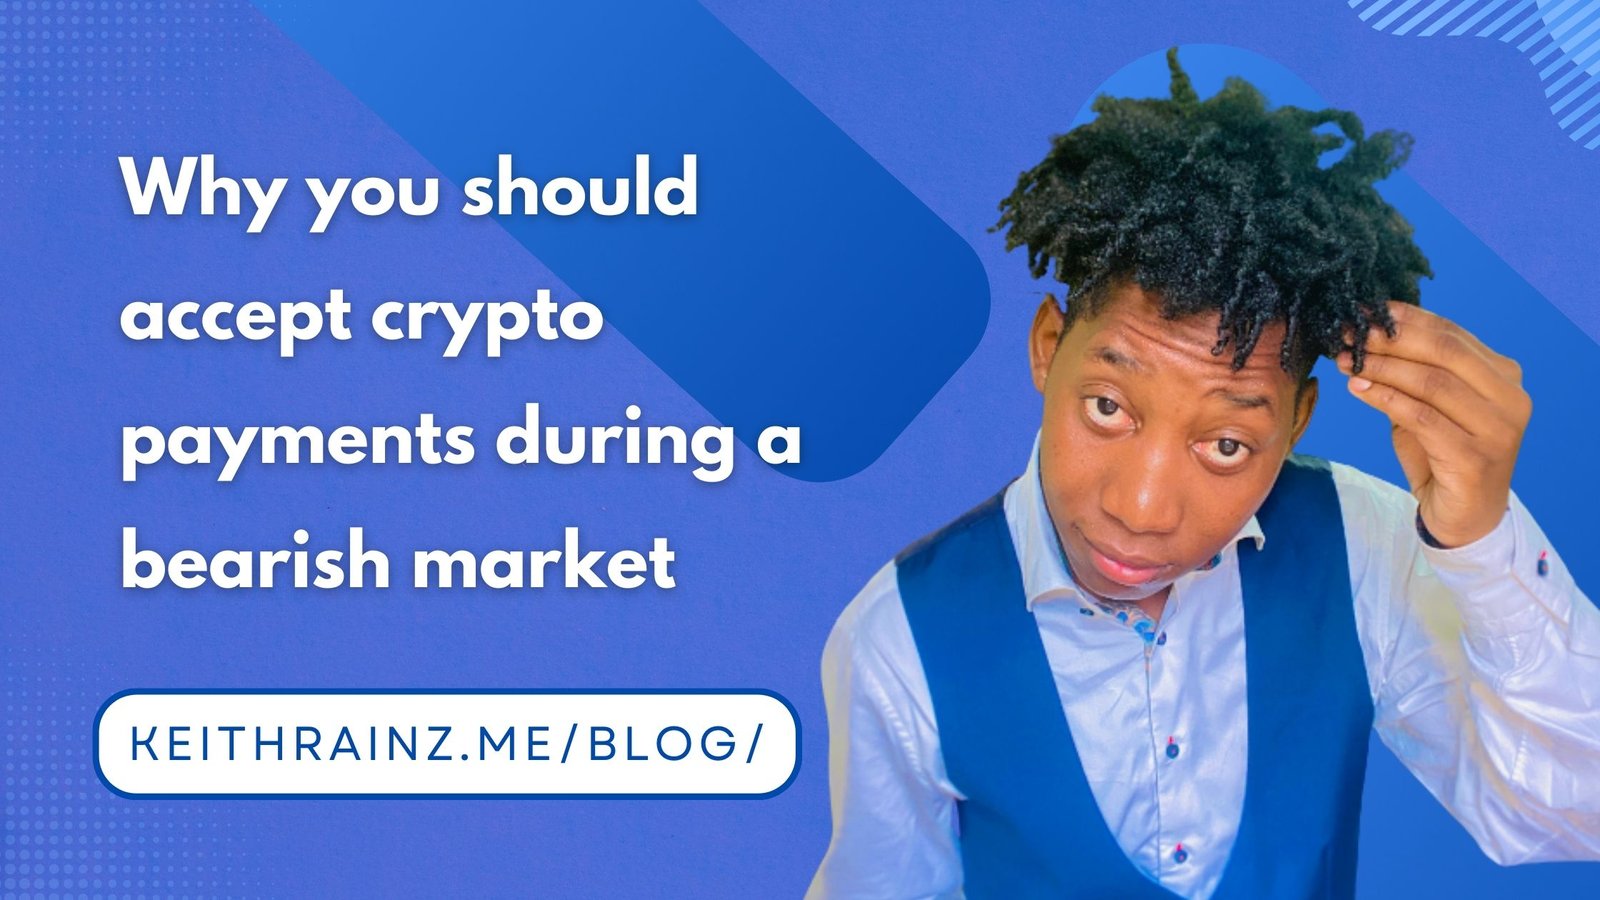 Why you should accept crypto payments during a bearish market